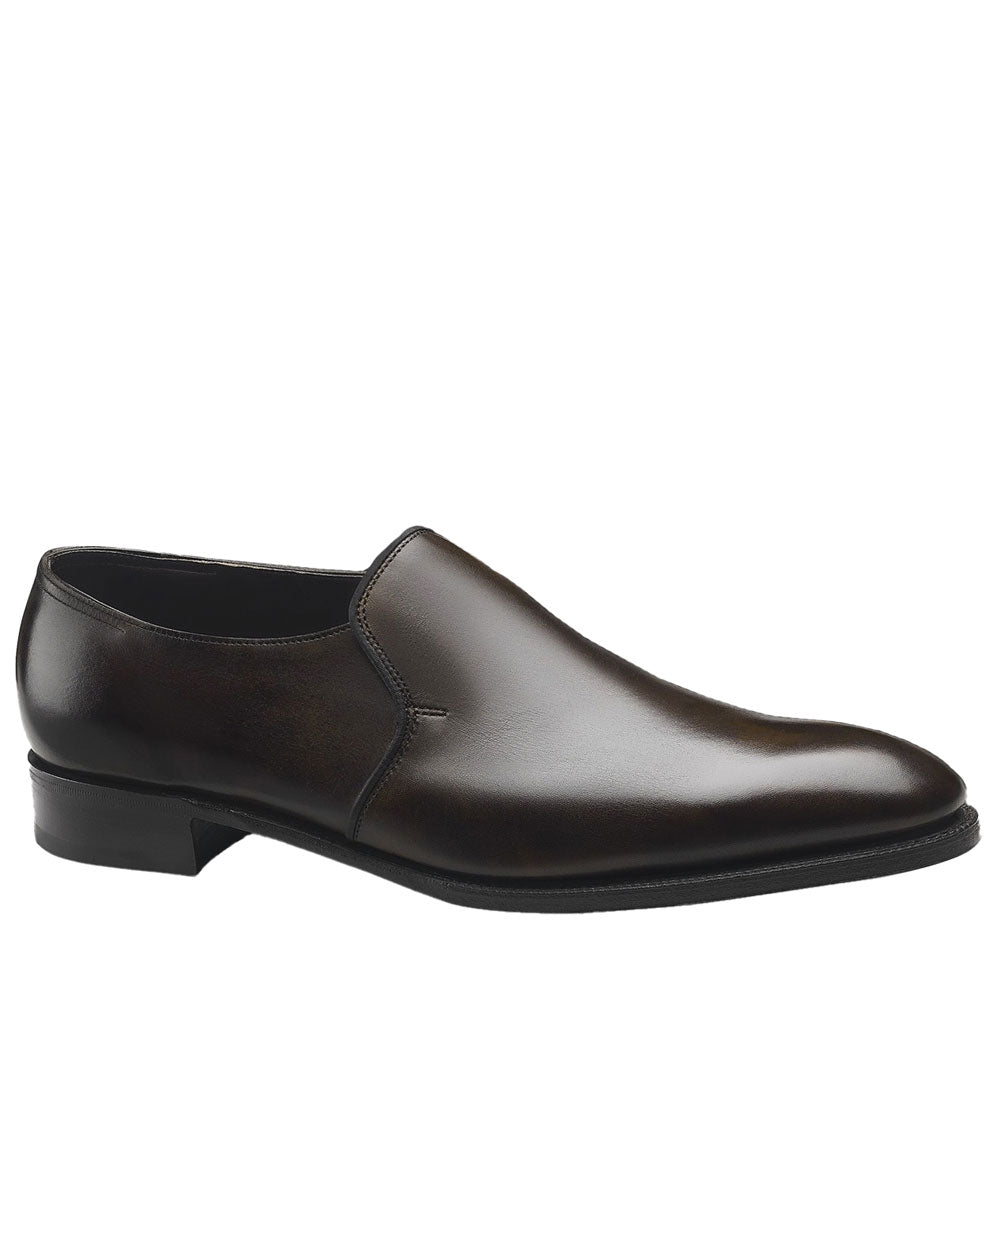 Edward Leather Loafer in Brown